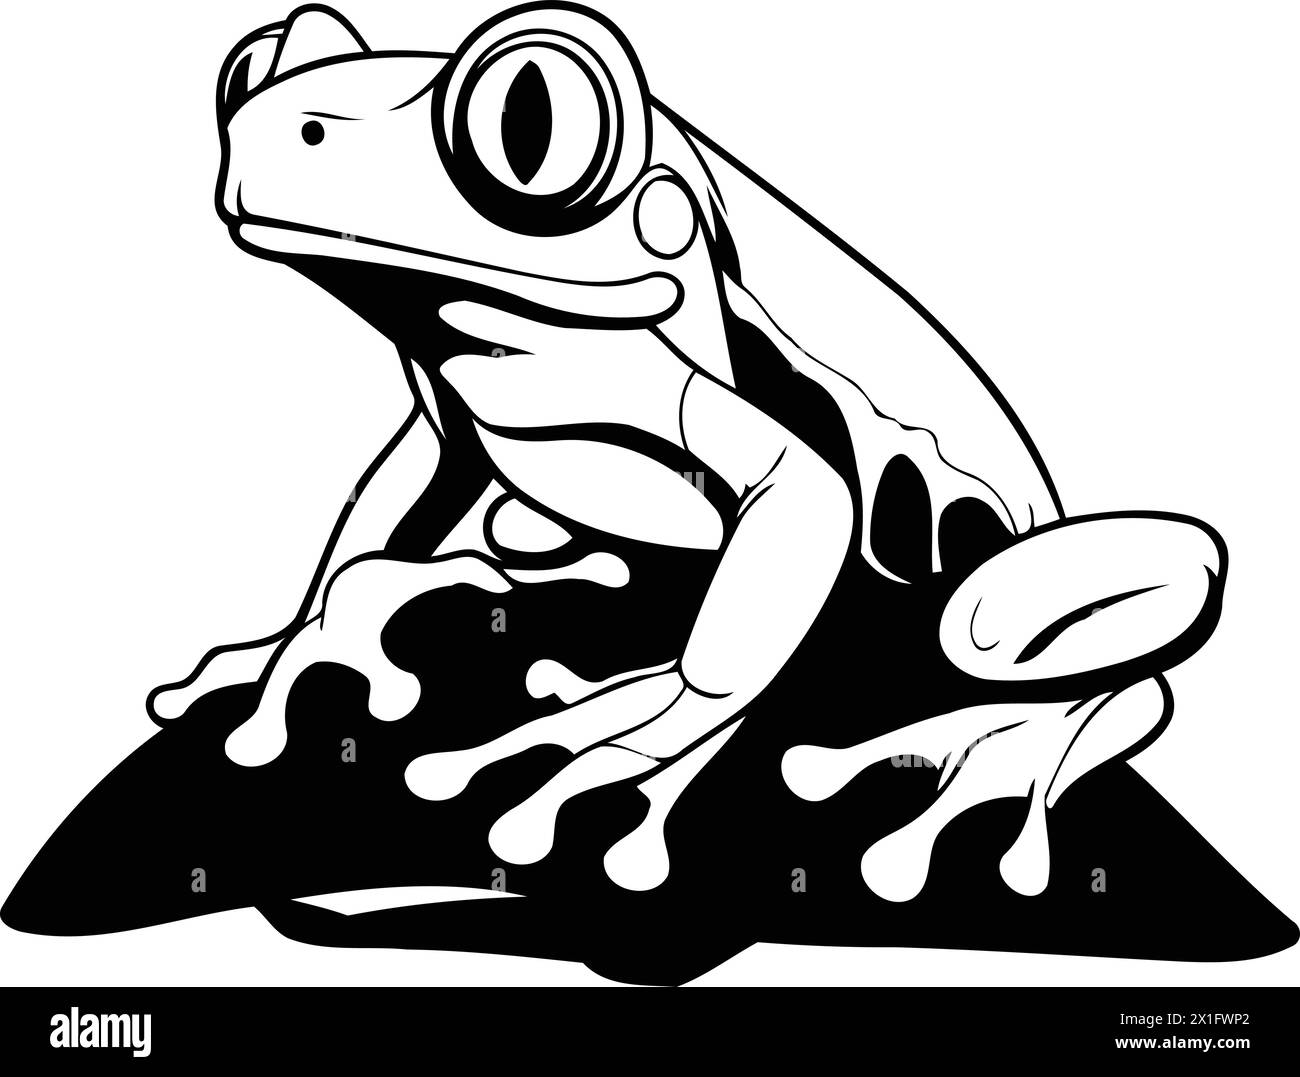 Frog cartoon vector illustration. Isolated on a white background. Stock Vector